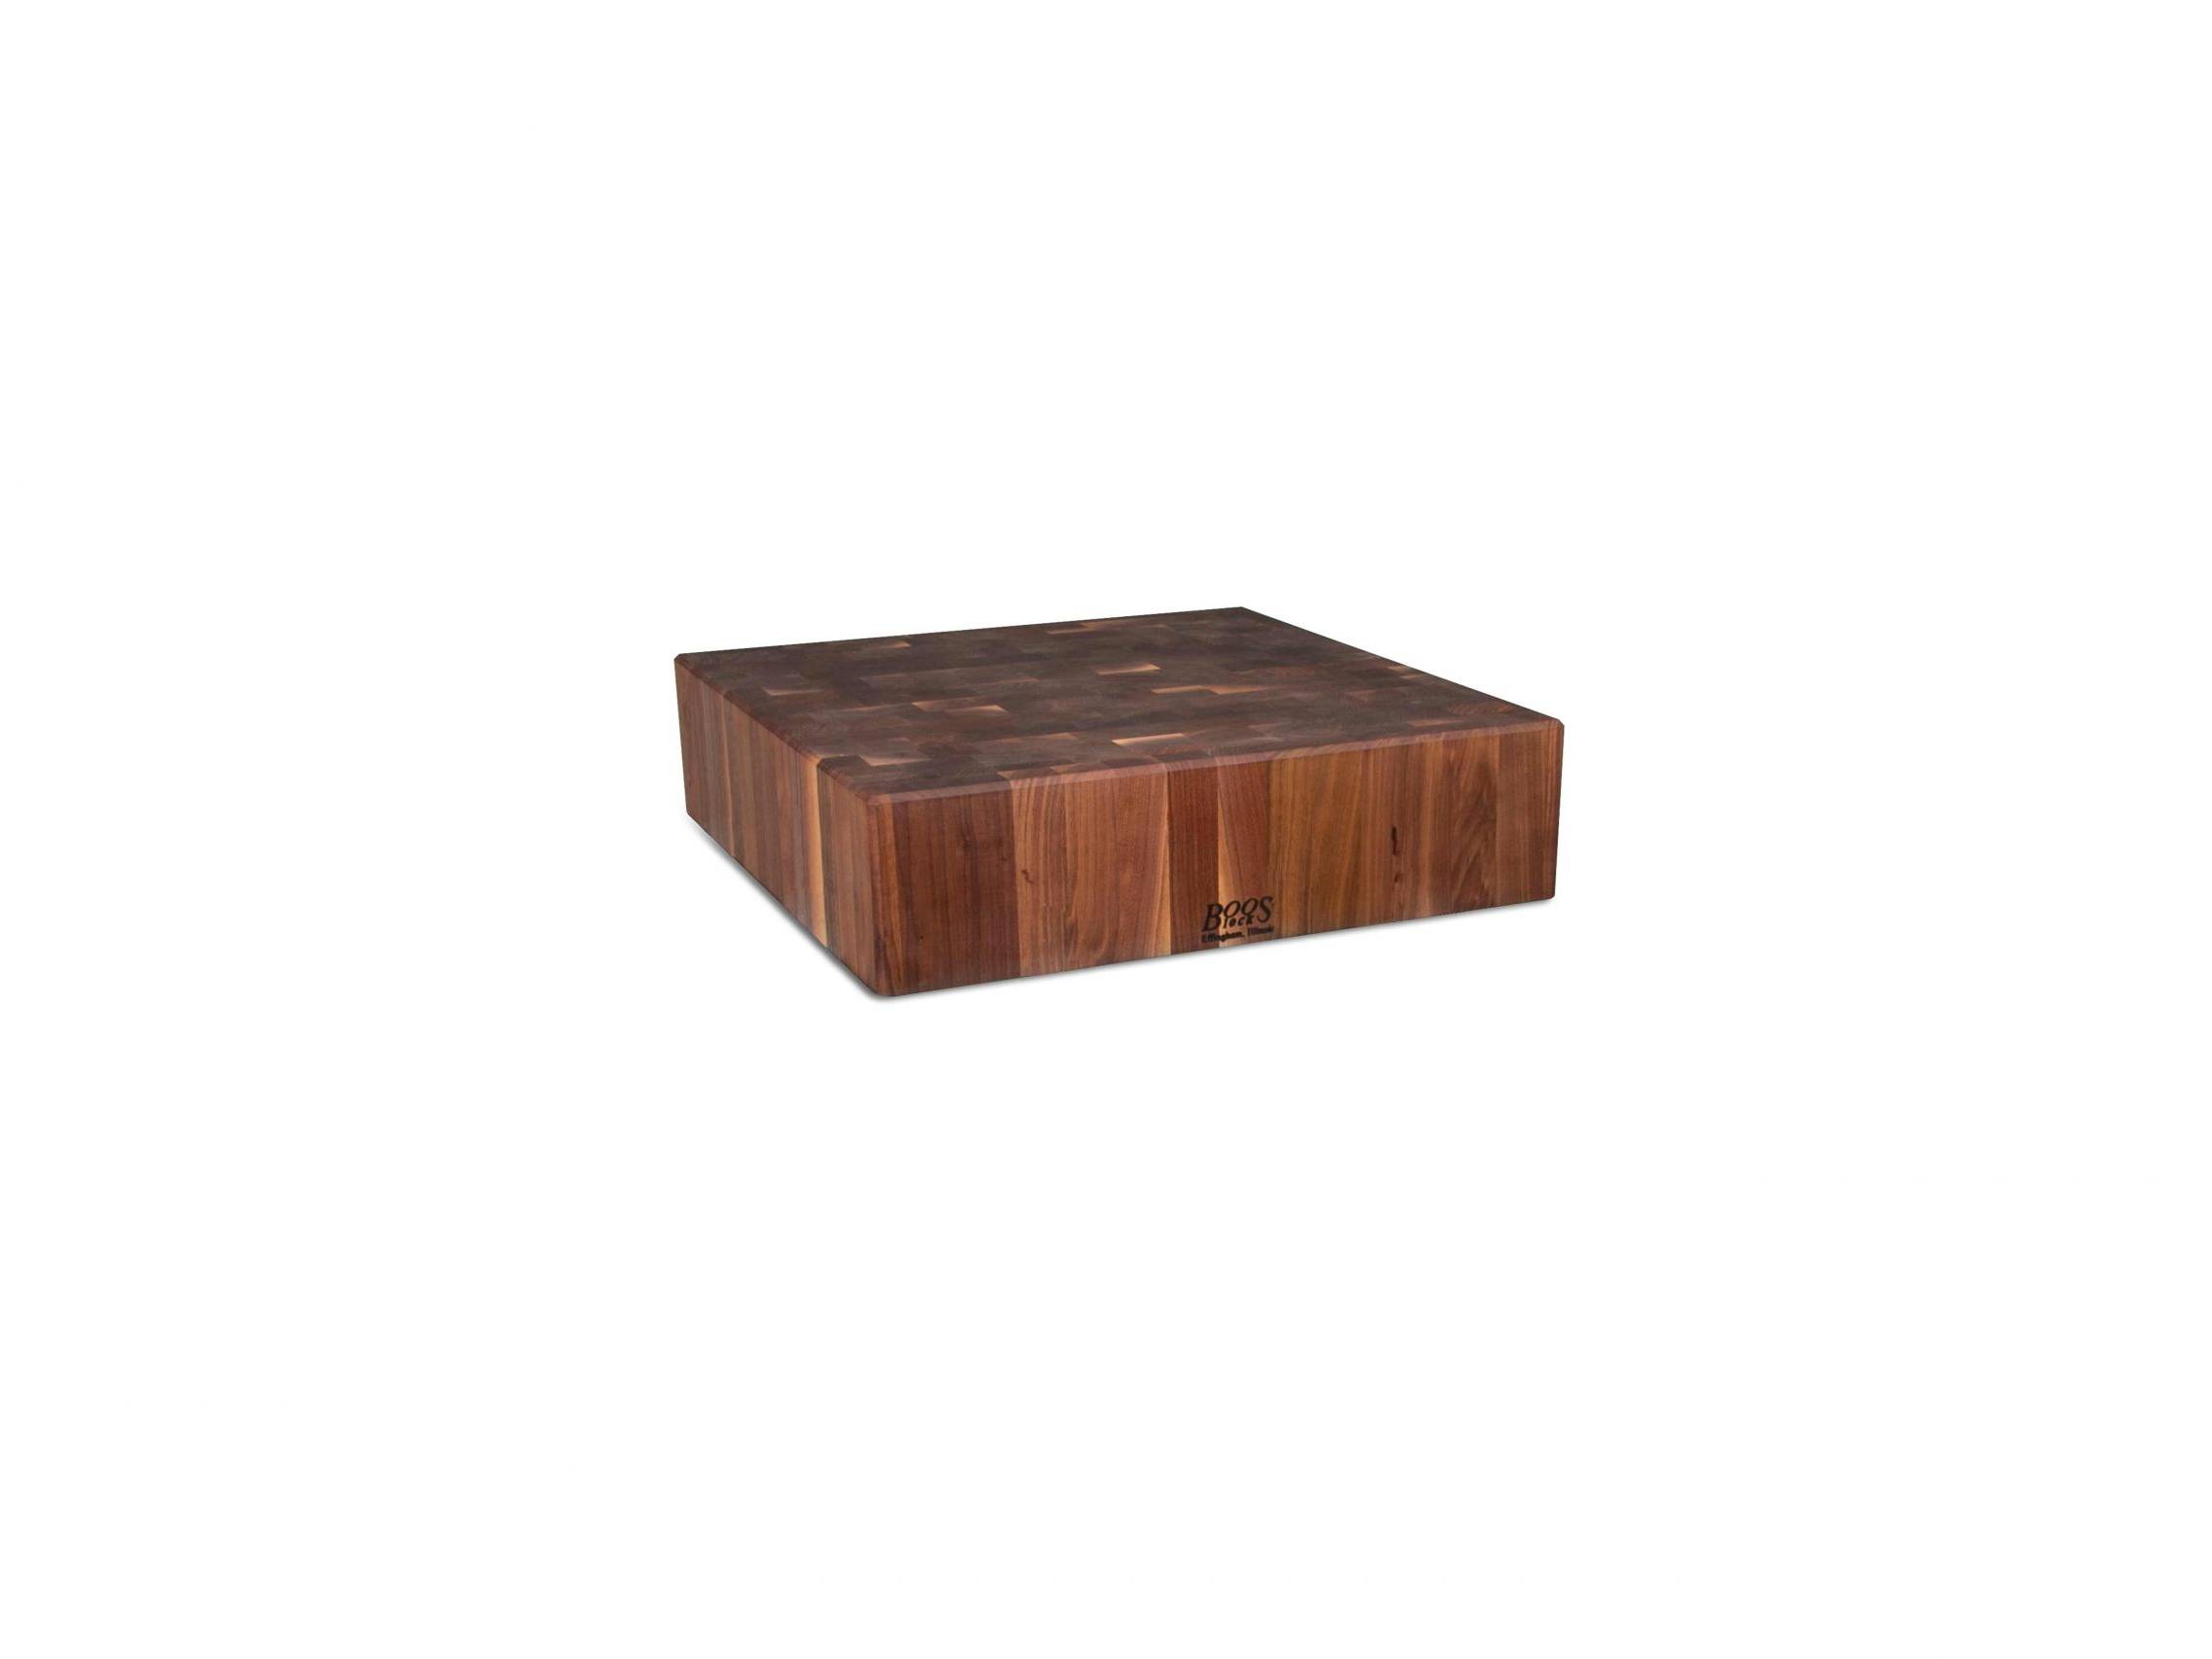 Boos® Leforza Block, face wood top; Black Walnut; natural finish with beeswax (block &amp; stainless steel base sold separately) 47